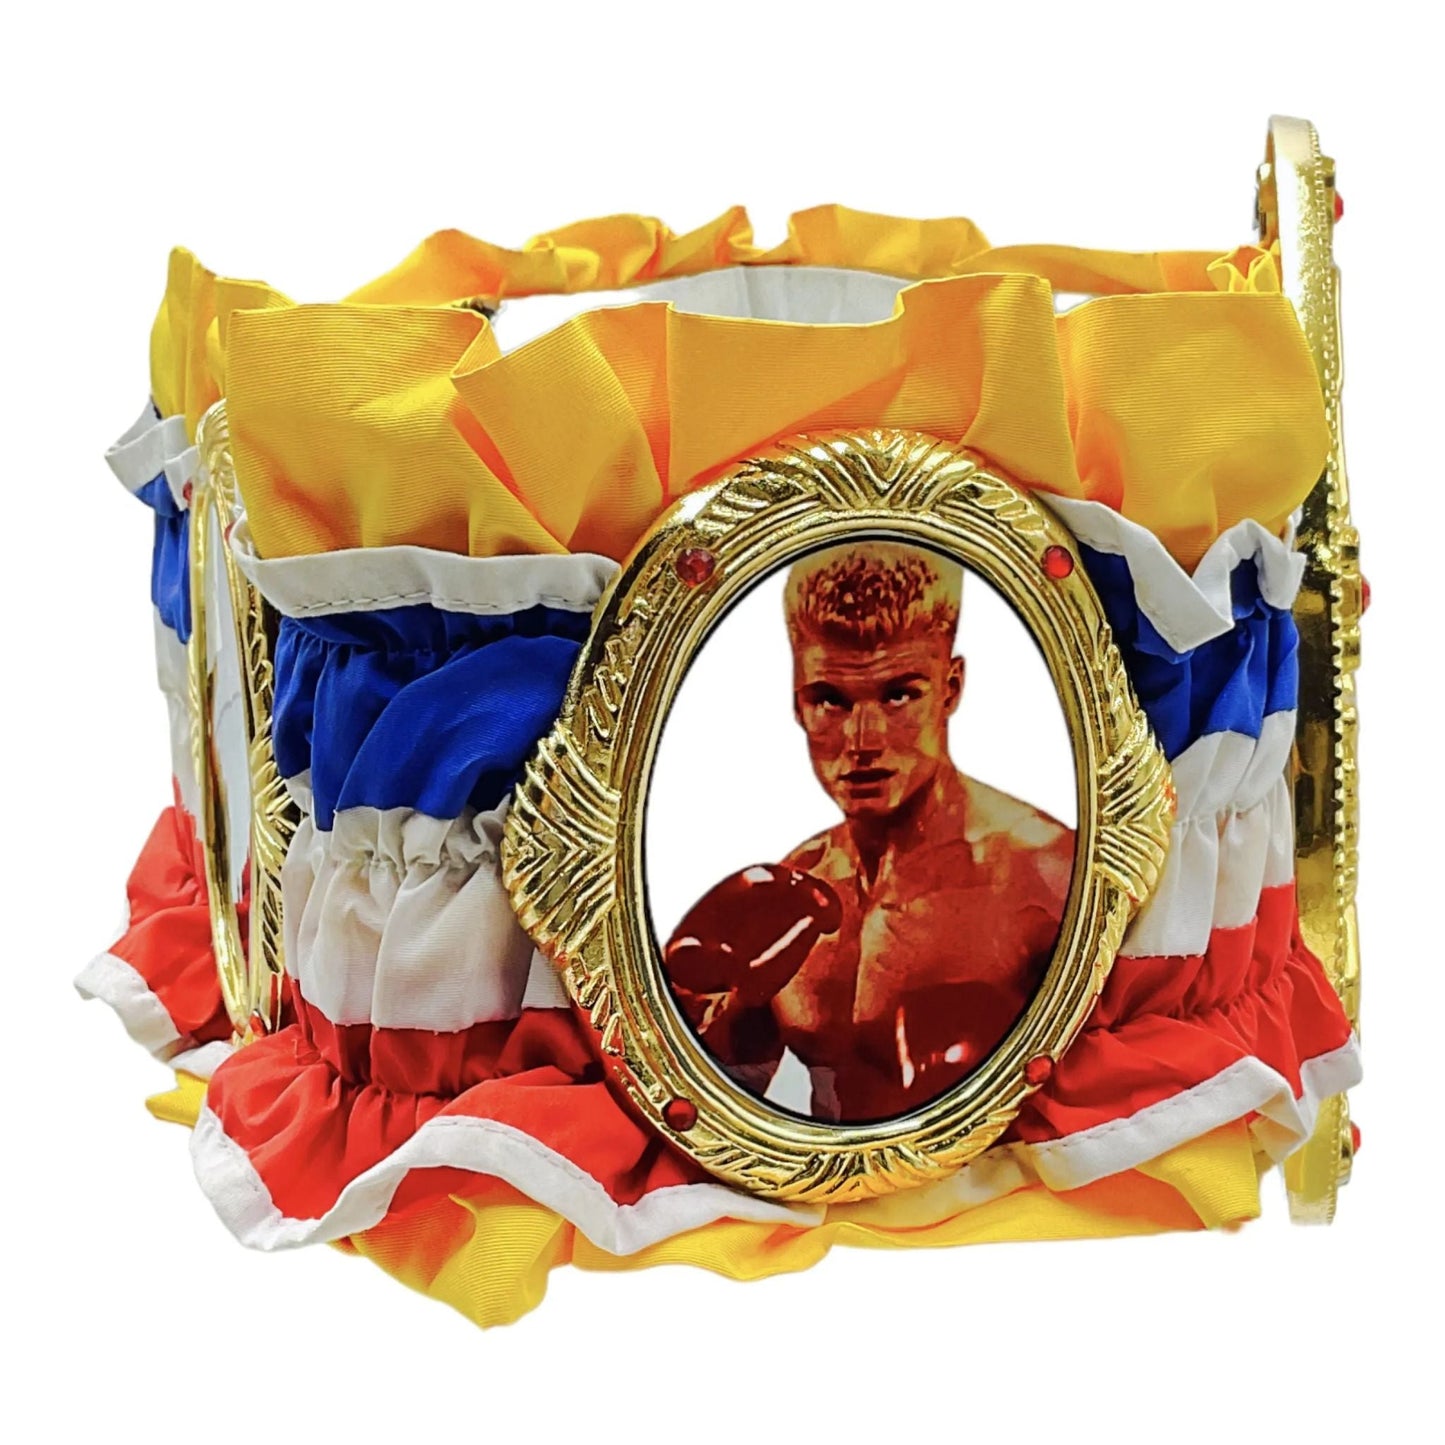 Ring Magazine (The Real Deal) Rocky Balboa World Heavyweight Replica Championship Boxing Title Belt